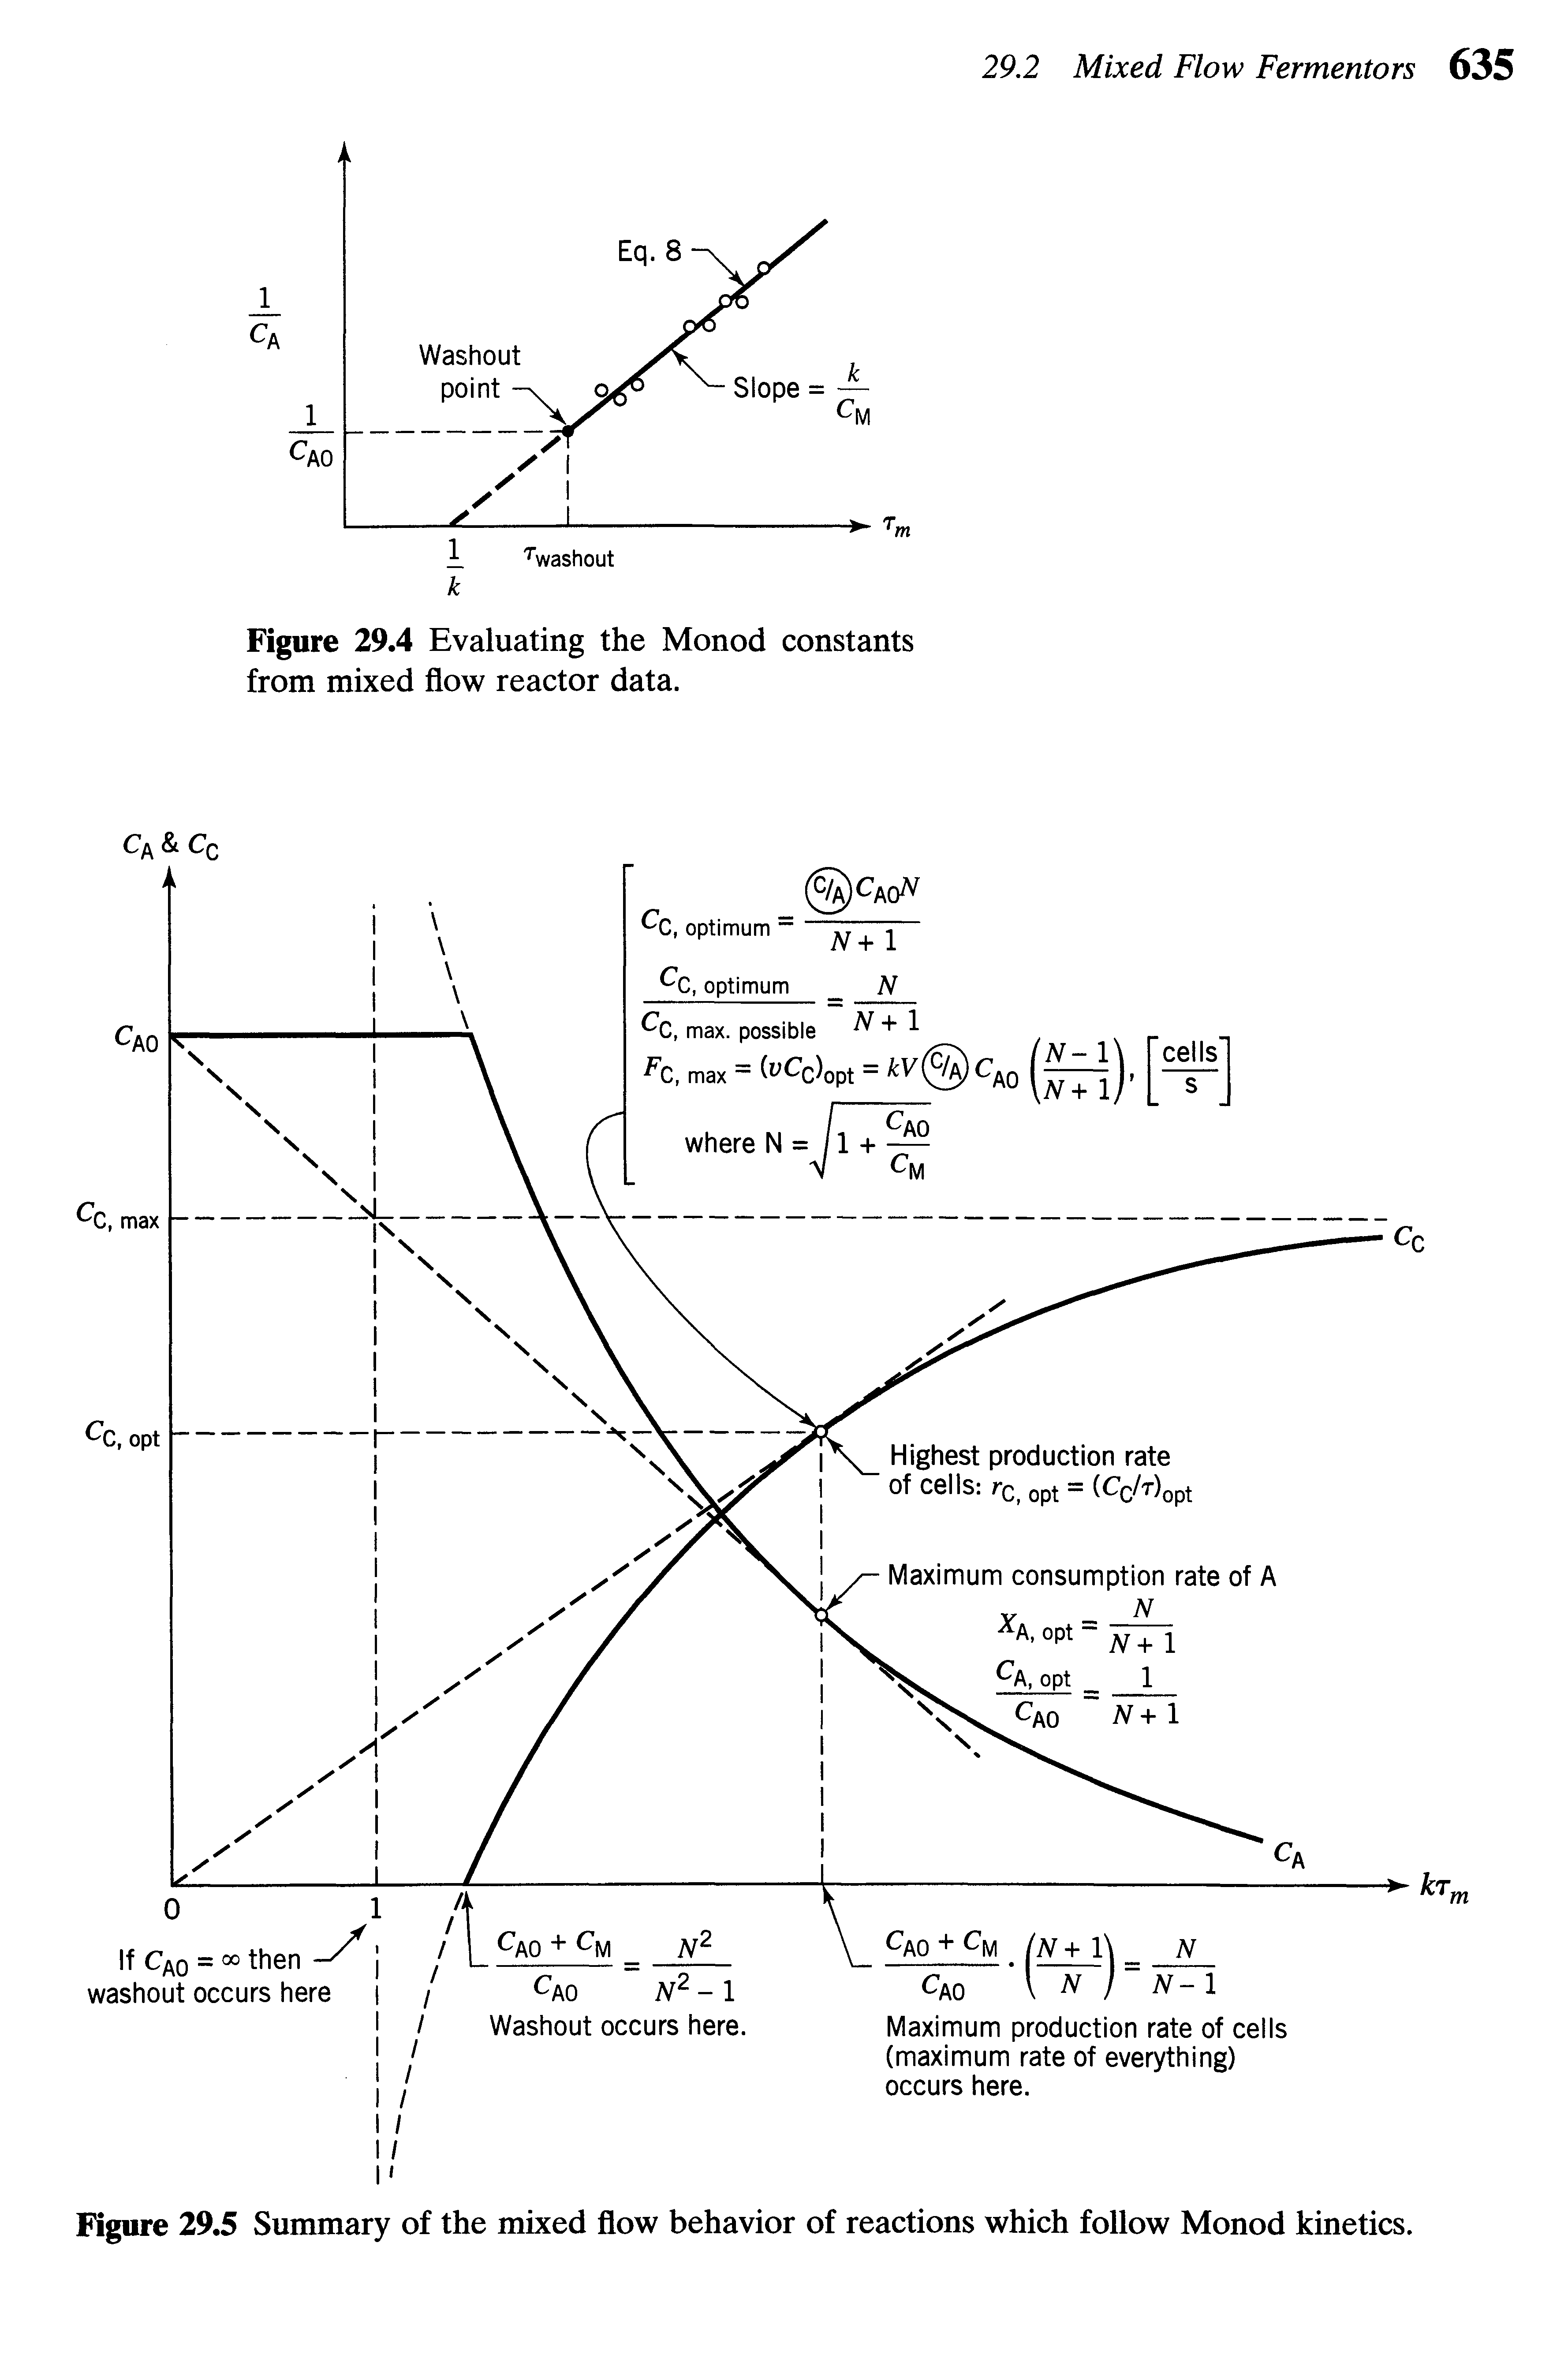 Figure 29.4 Evaluating the Monod constants from mixed flow reactor data.